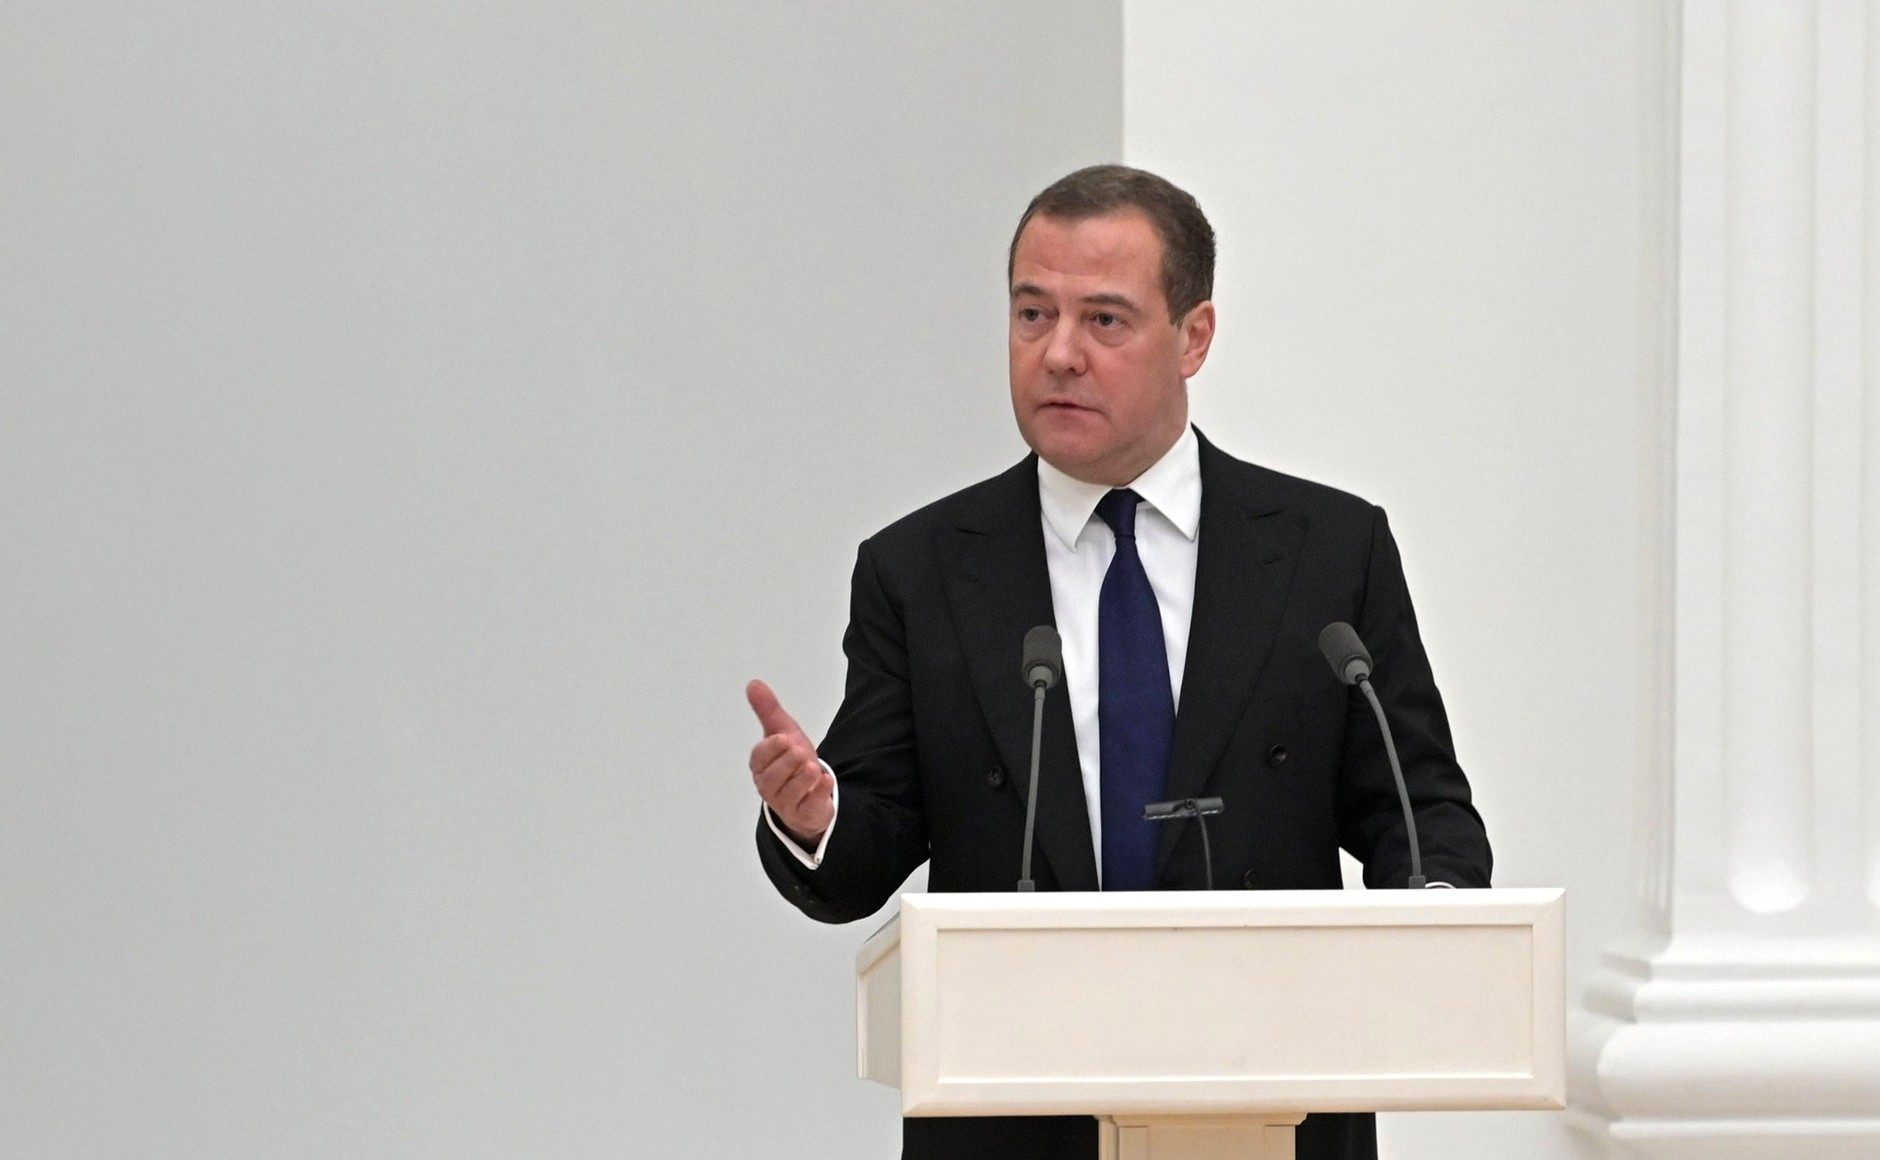 Medvedev, deputy chairman of Vladimir Putin’s security council, claimed the UK’s support for Kyiv amounted to an “undeclared war” against Russia. Photo: dpa